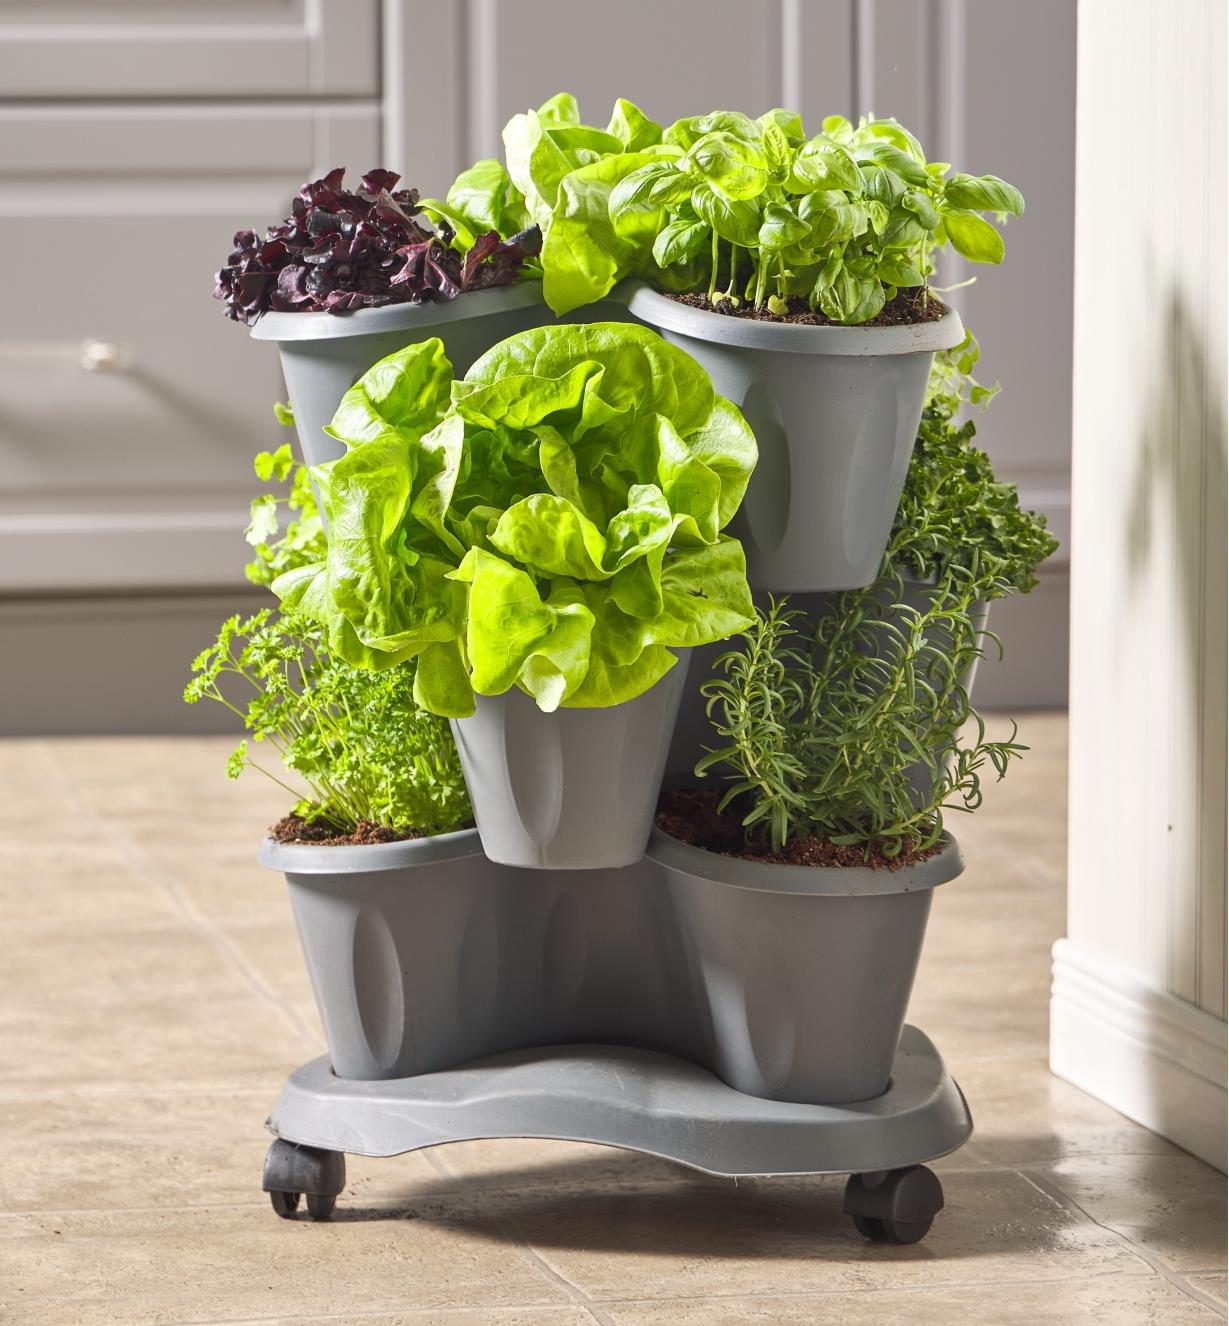 A three-level planter full of plants on a kitchen floor